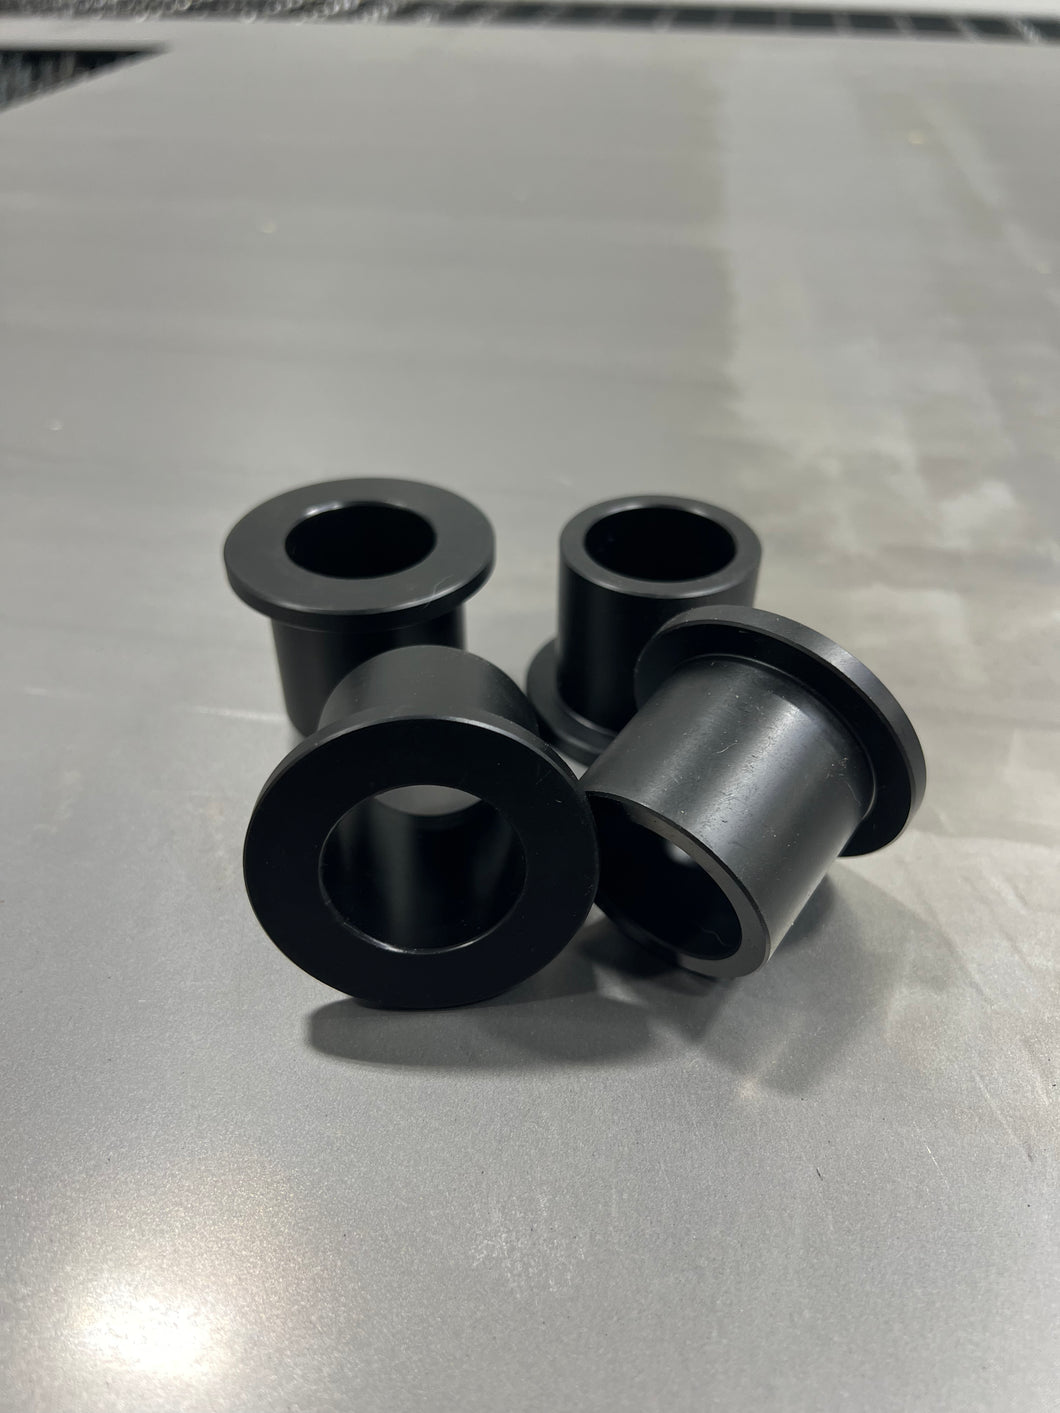 Delrin replacement bushings for coilover kit